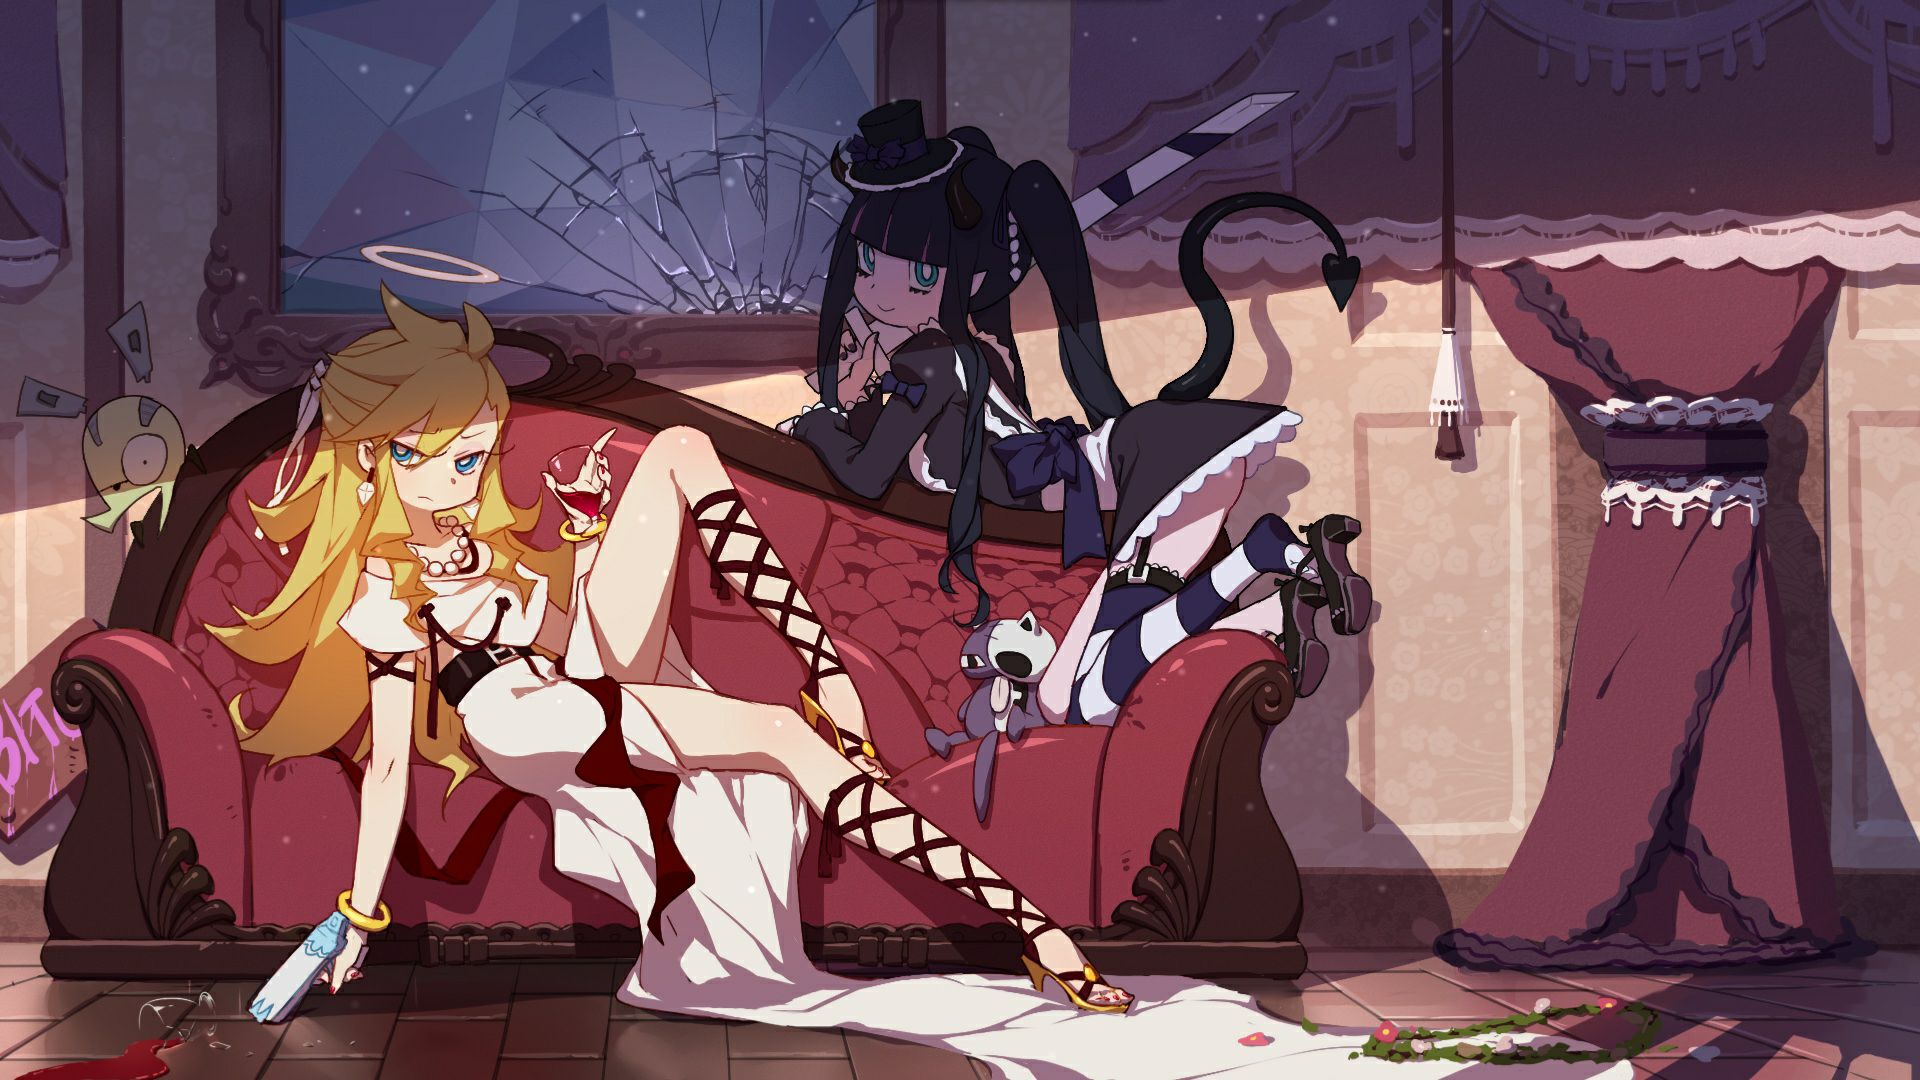 panty & stocking with garterbelt, anime, panty anarchy, stocking anarchy download HD wallpaper